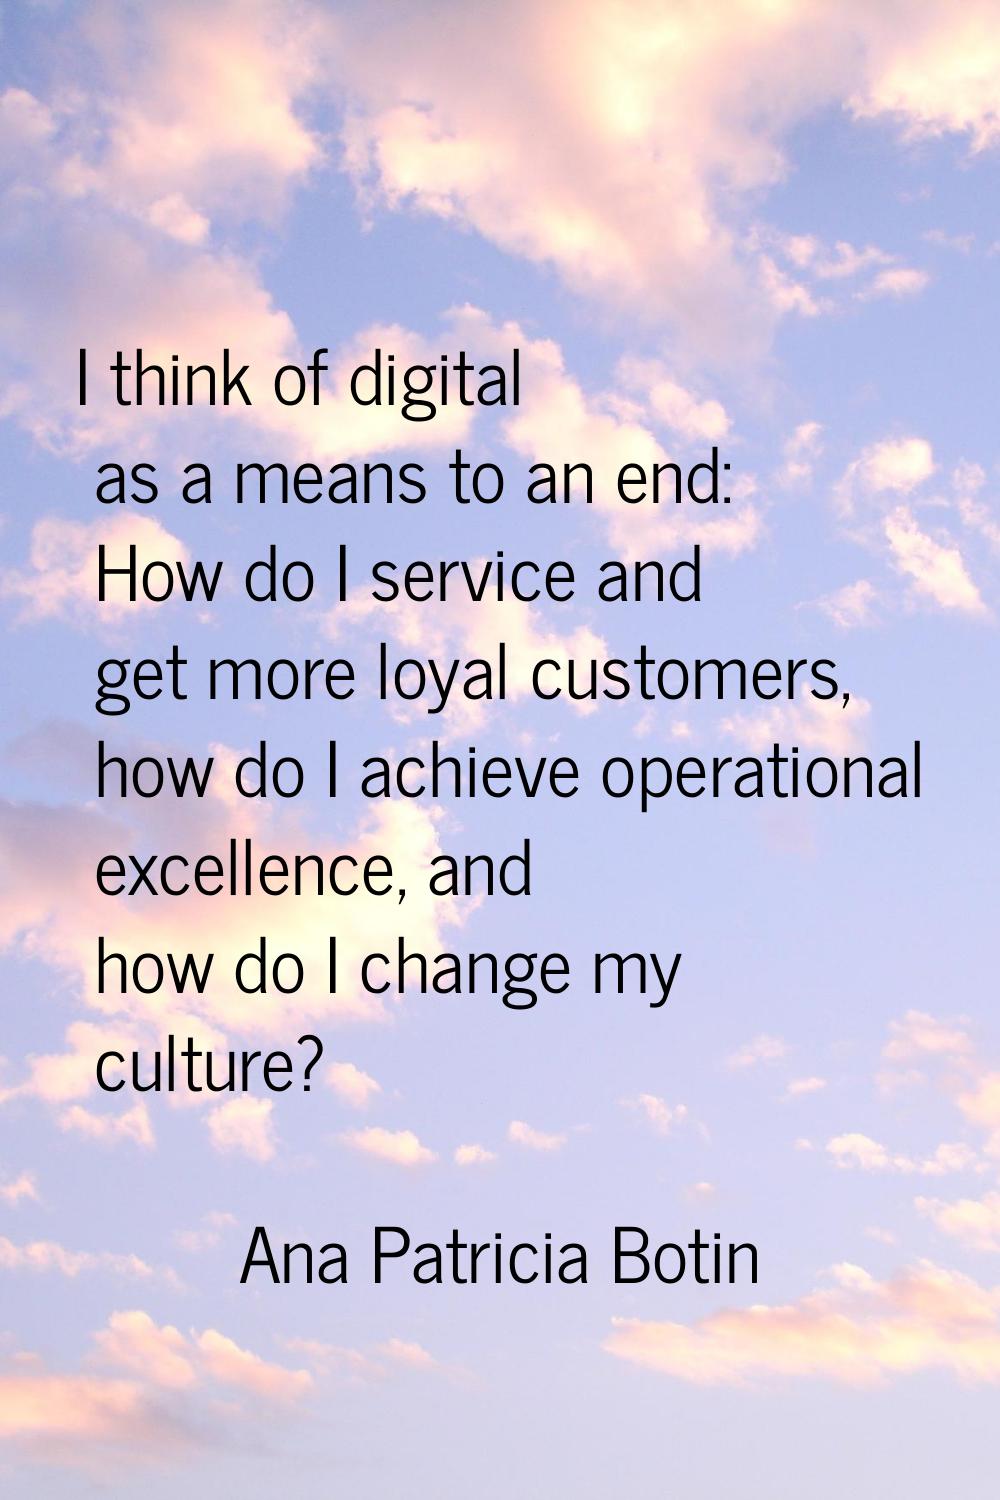 I think of digital as a means to an end: How do I service and get more loyal customers, how do I ac